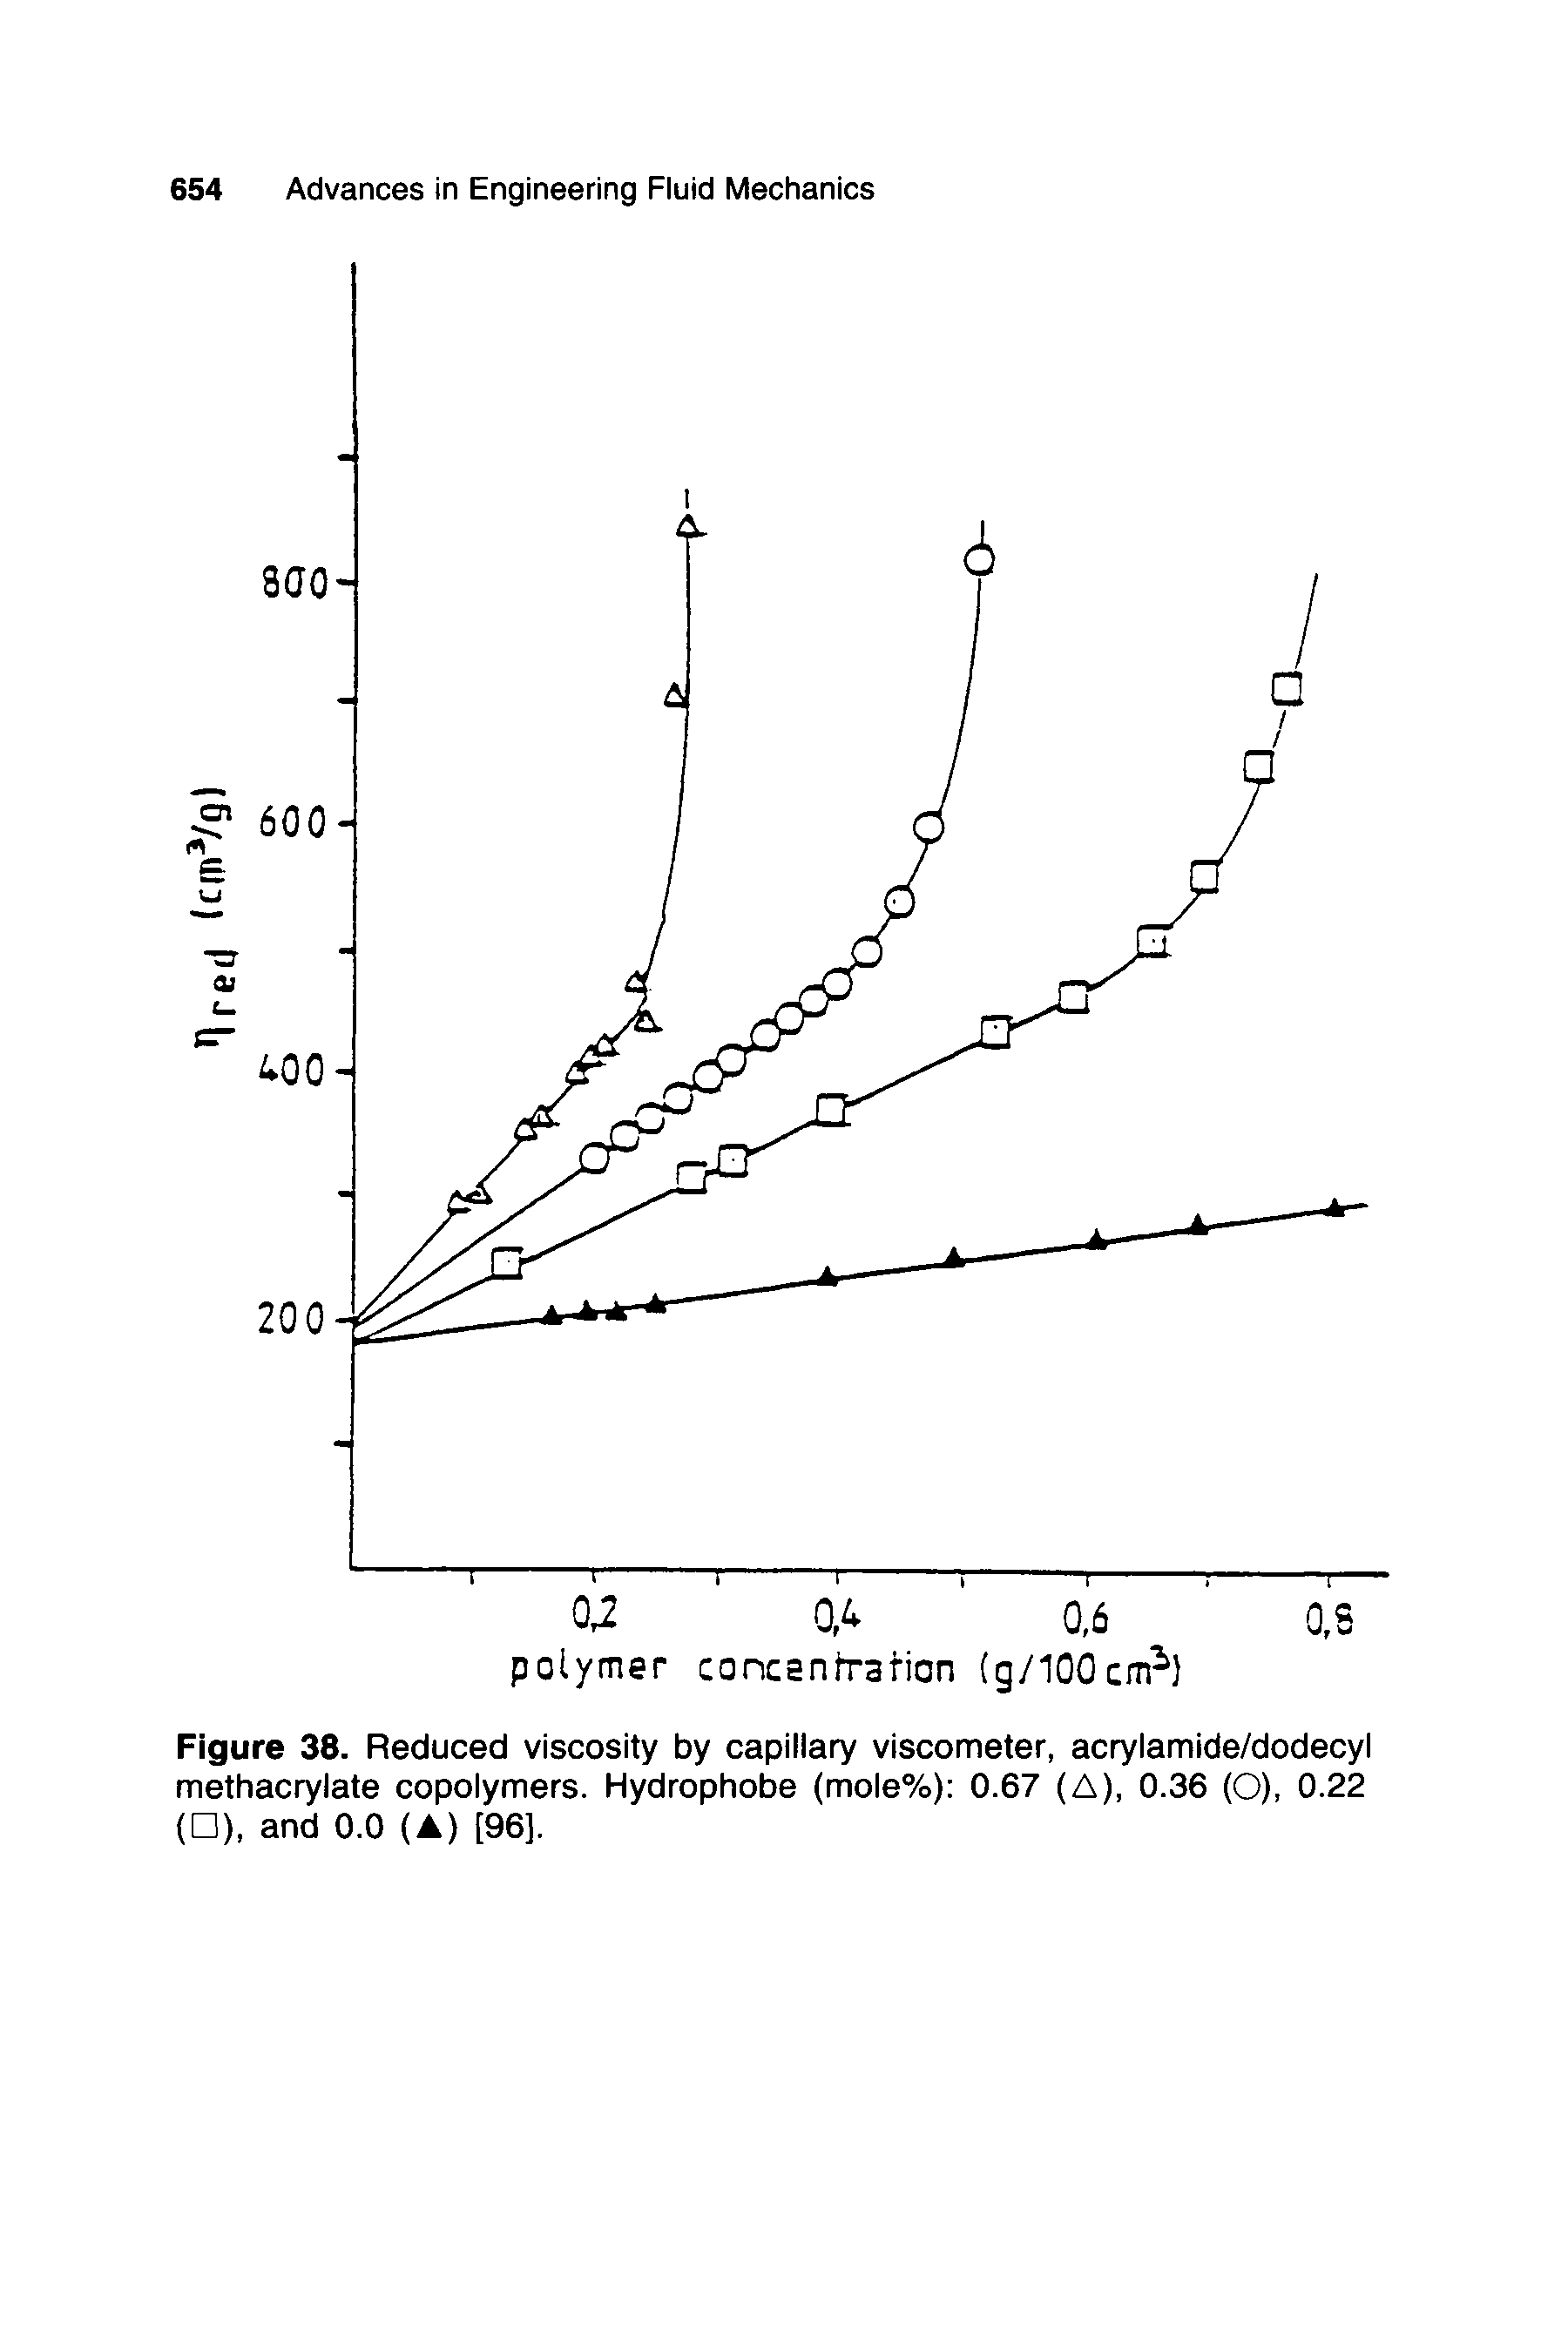 Figure 38. Reduced viscosity by capillary viscometer, acrylamide/dodecyl methacrylate copolymers. Hydrophobe (mole%) 0.67 (A), 0.36 (O), 0.22 ( ), and 0.0 (A) [96].